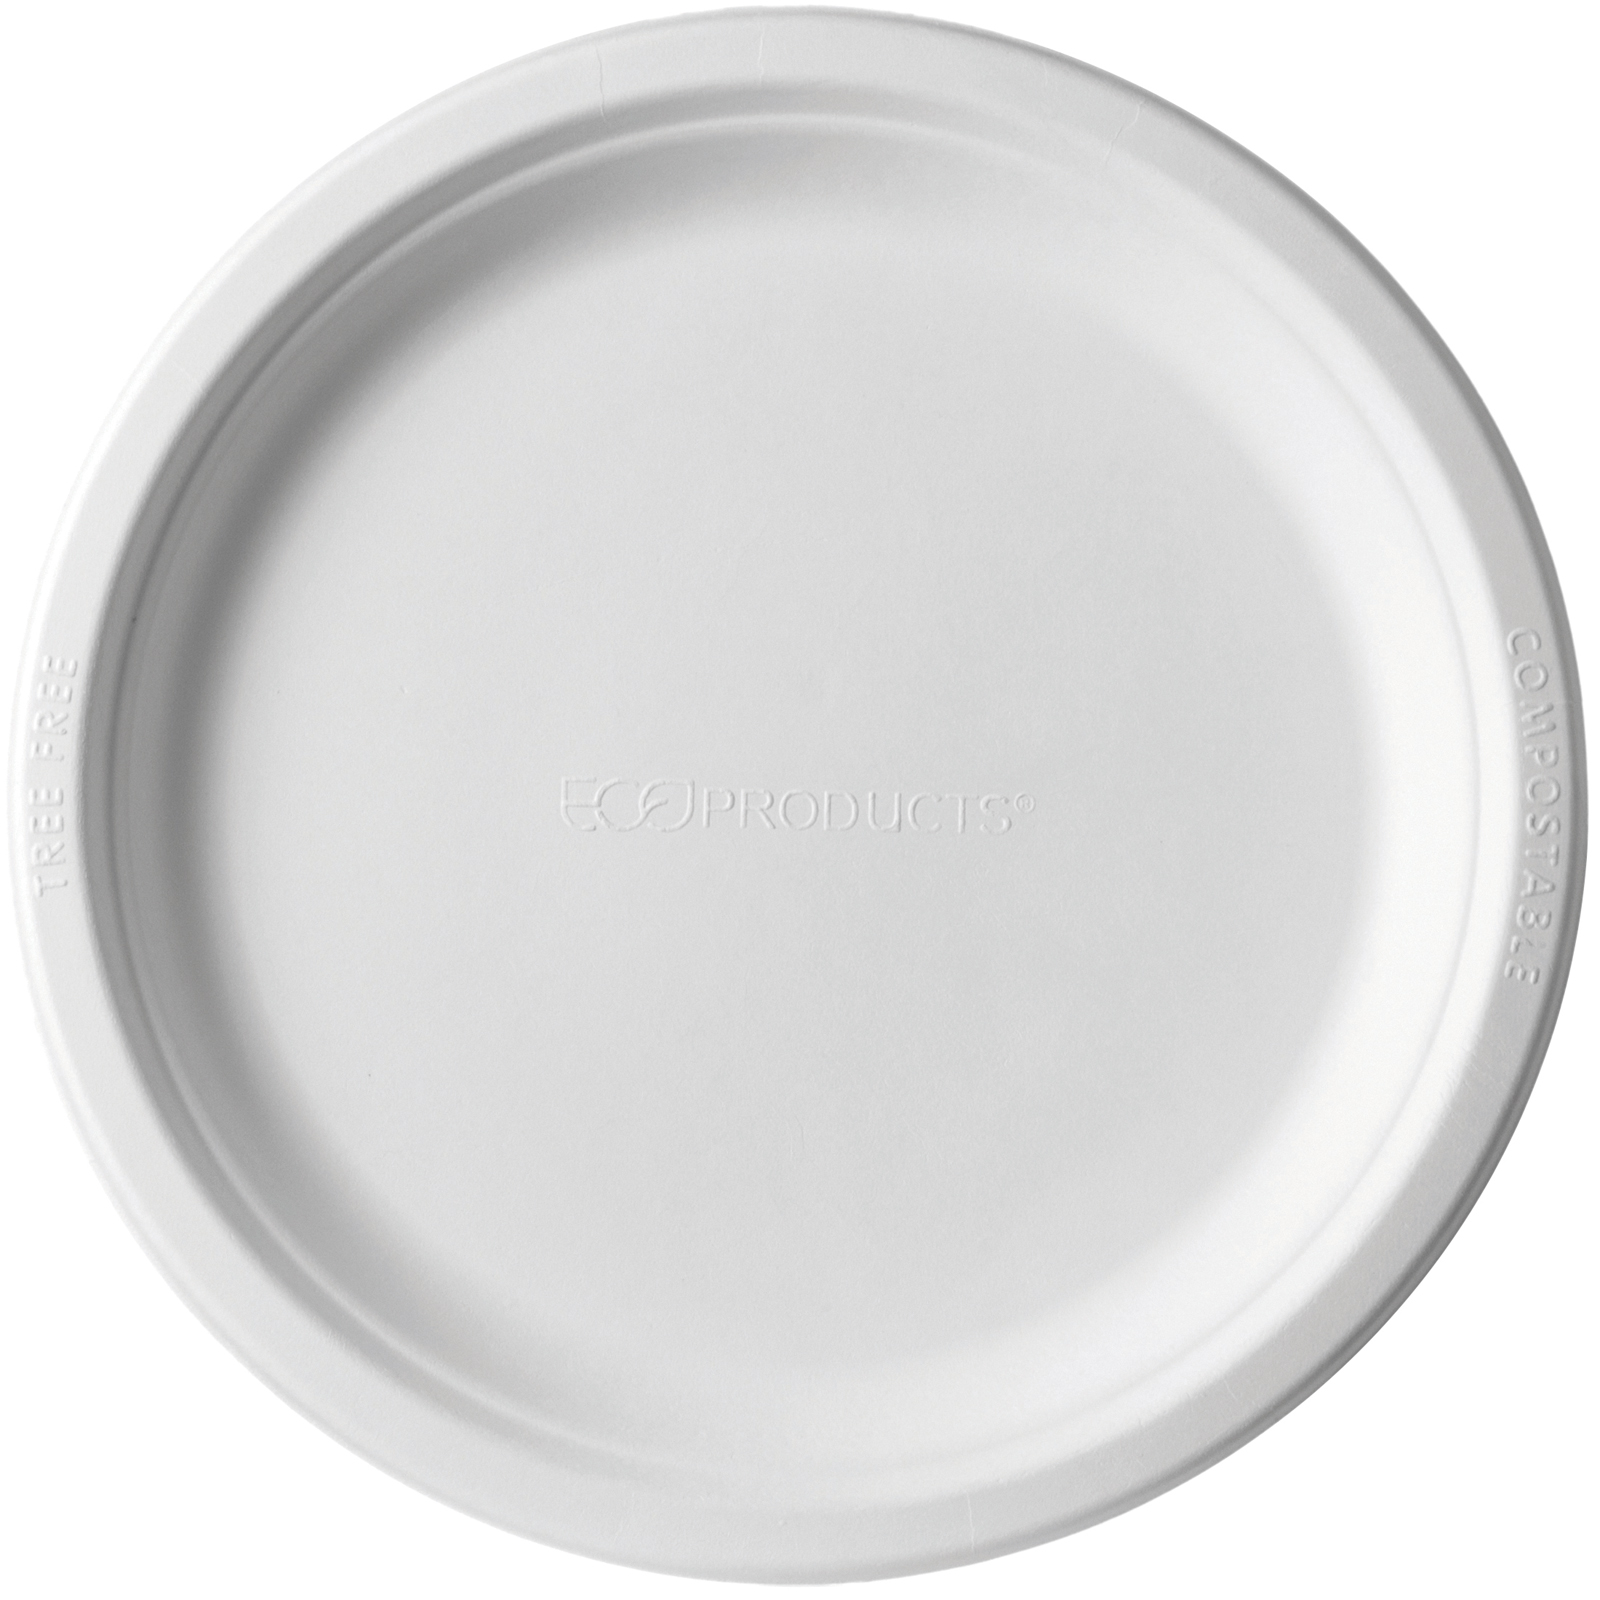 Biodegradable Plate 230mm